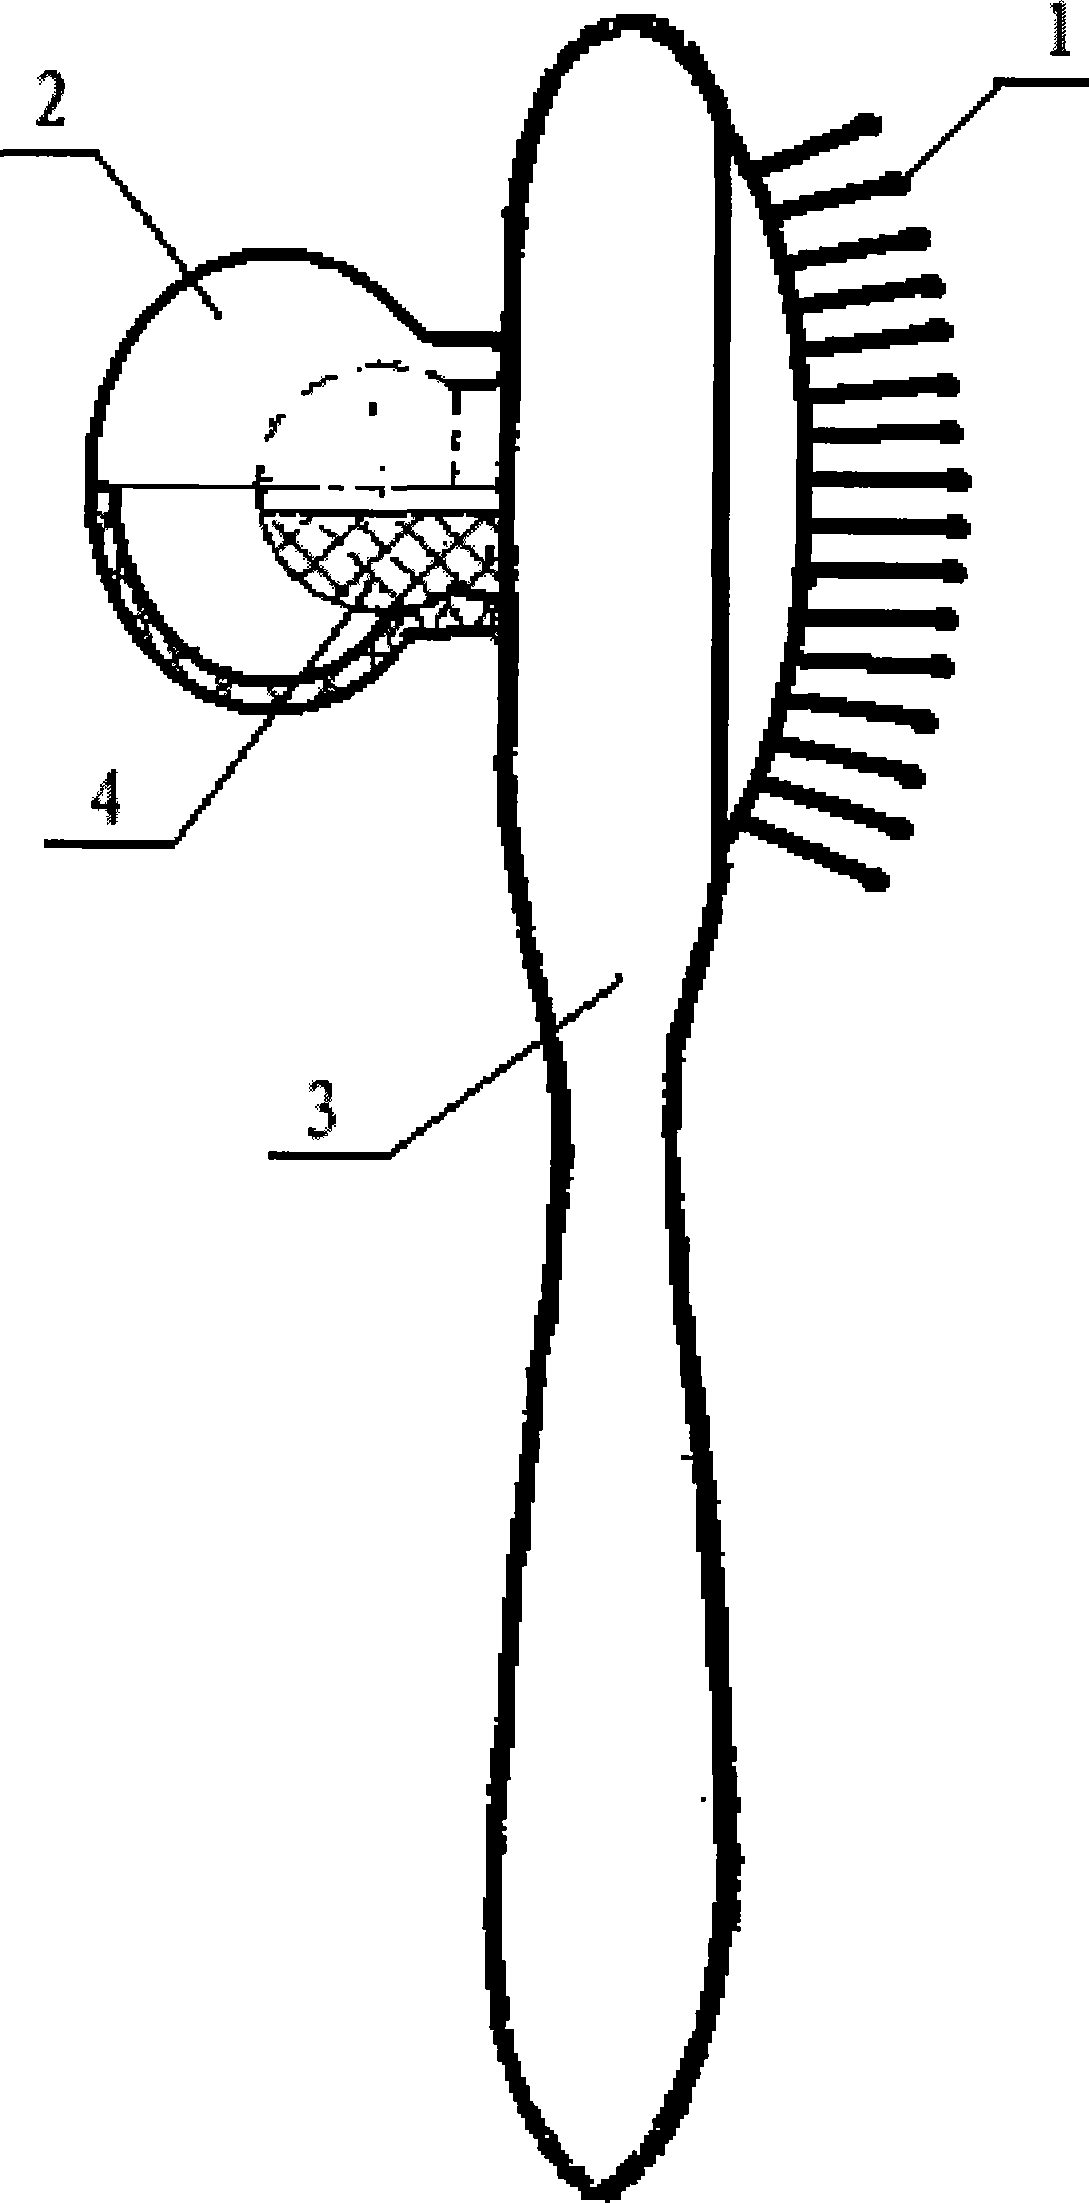 Apparatus for treatment, auxiliary treatment of eye diseases such as hypometropia and/or insufficiency of cerebral blood supply